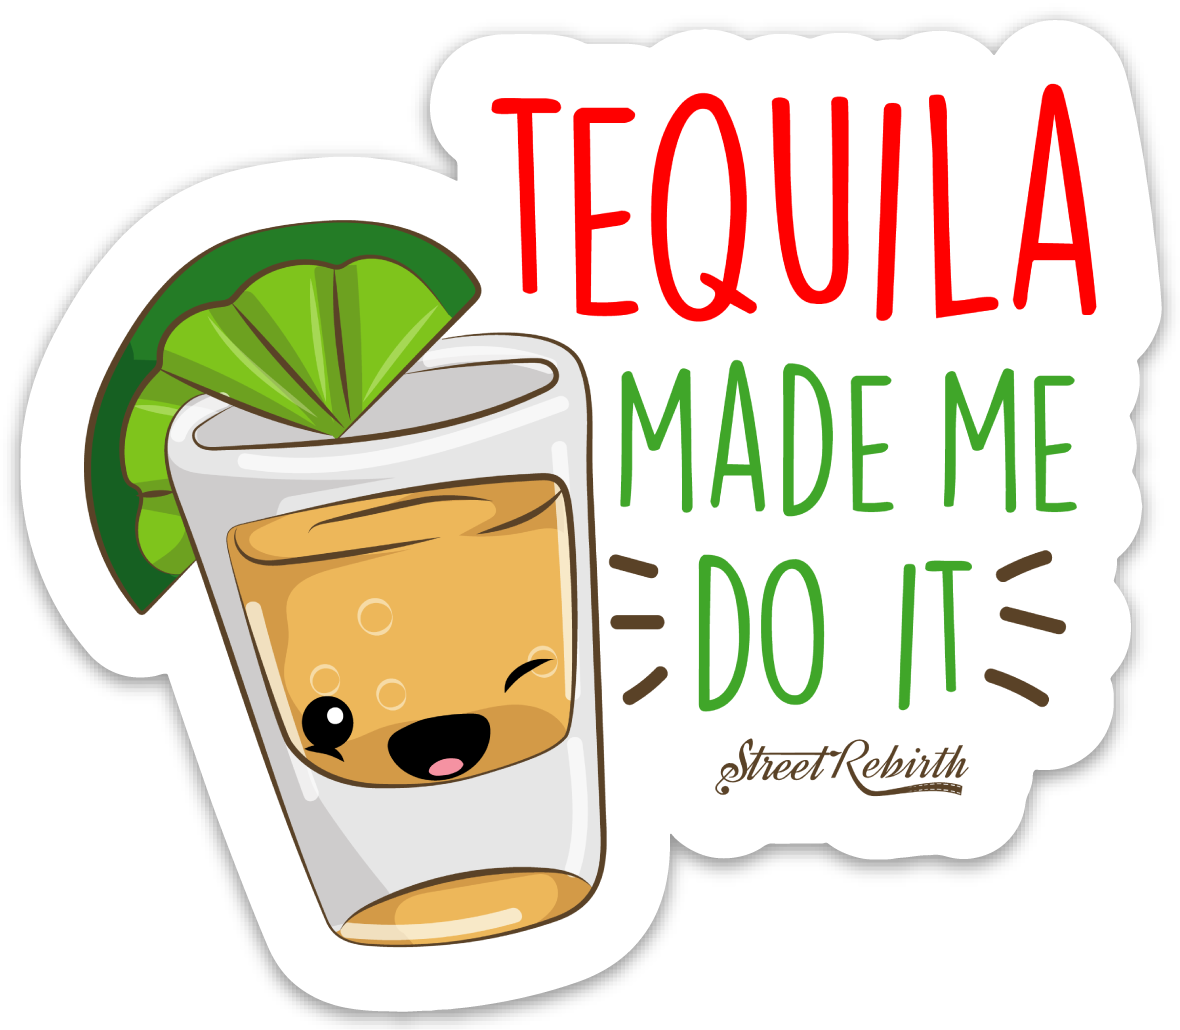 Tequila Made Me Do It PUN STICKER – ONE 4 INCH WATER PROOF VINYL STICKER – FOR HYDRO FLASK, SKATEBOARD, LAPTOP, PLANNER, CAR, COLLECTING, GIFTING